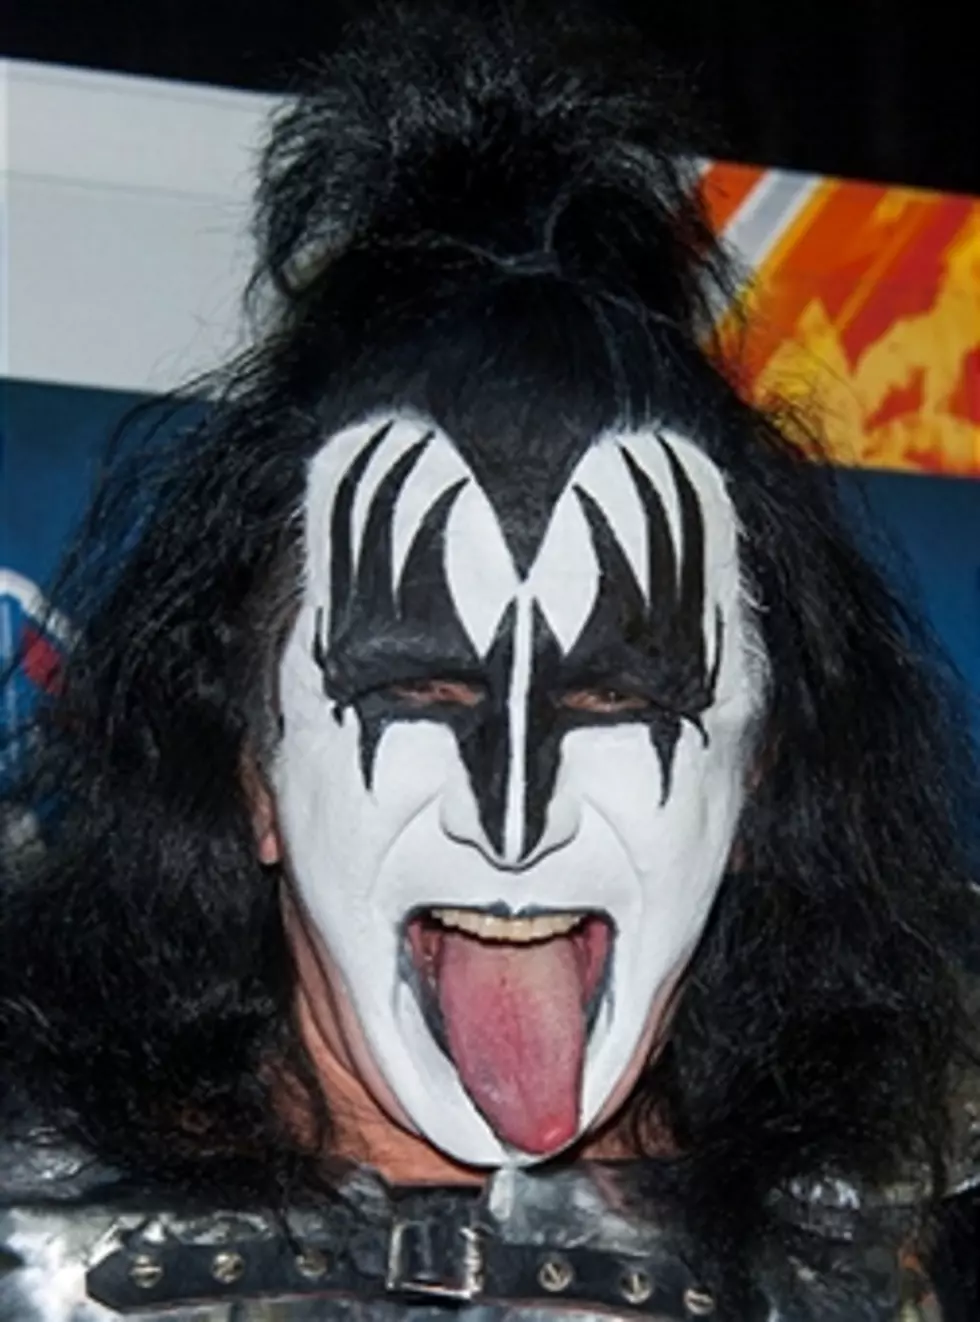 High School Kids Get Kicked Out Of Costume Day For Looking Too Much Like KISS &#8212; And Your Embarrassing Moments From Childhood [AUDIO]